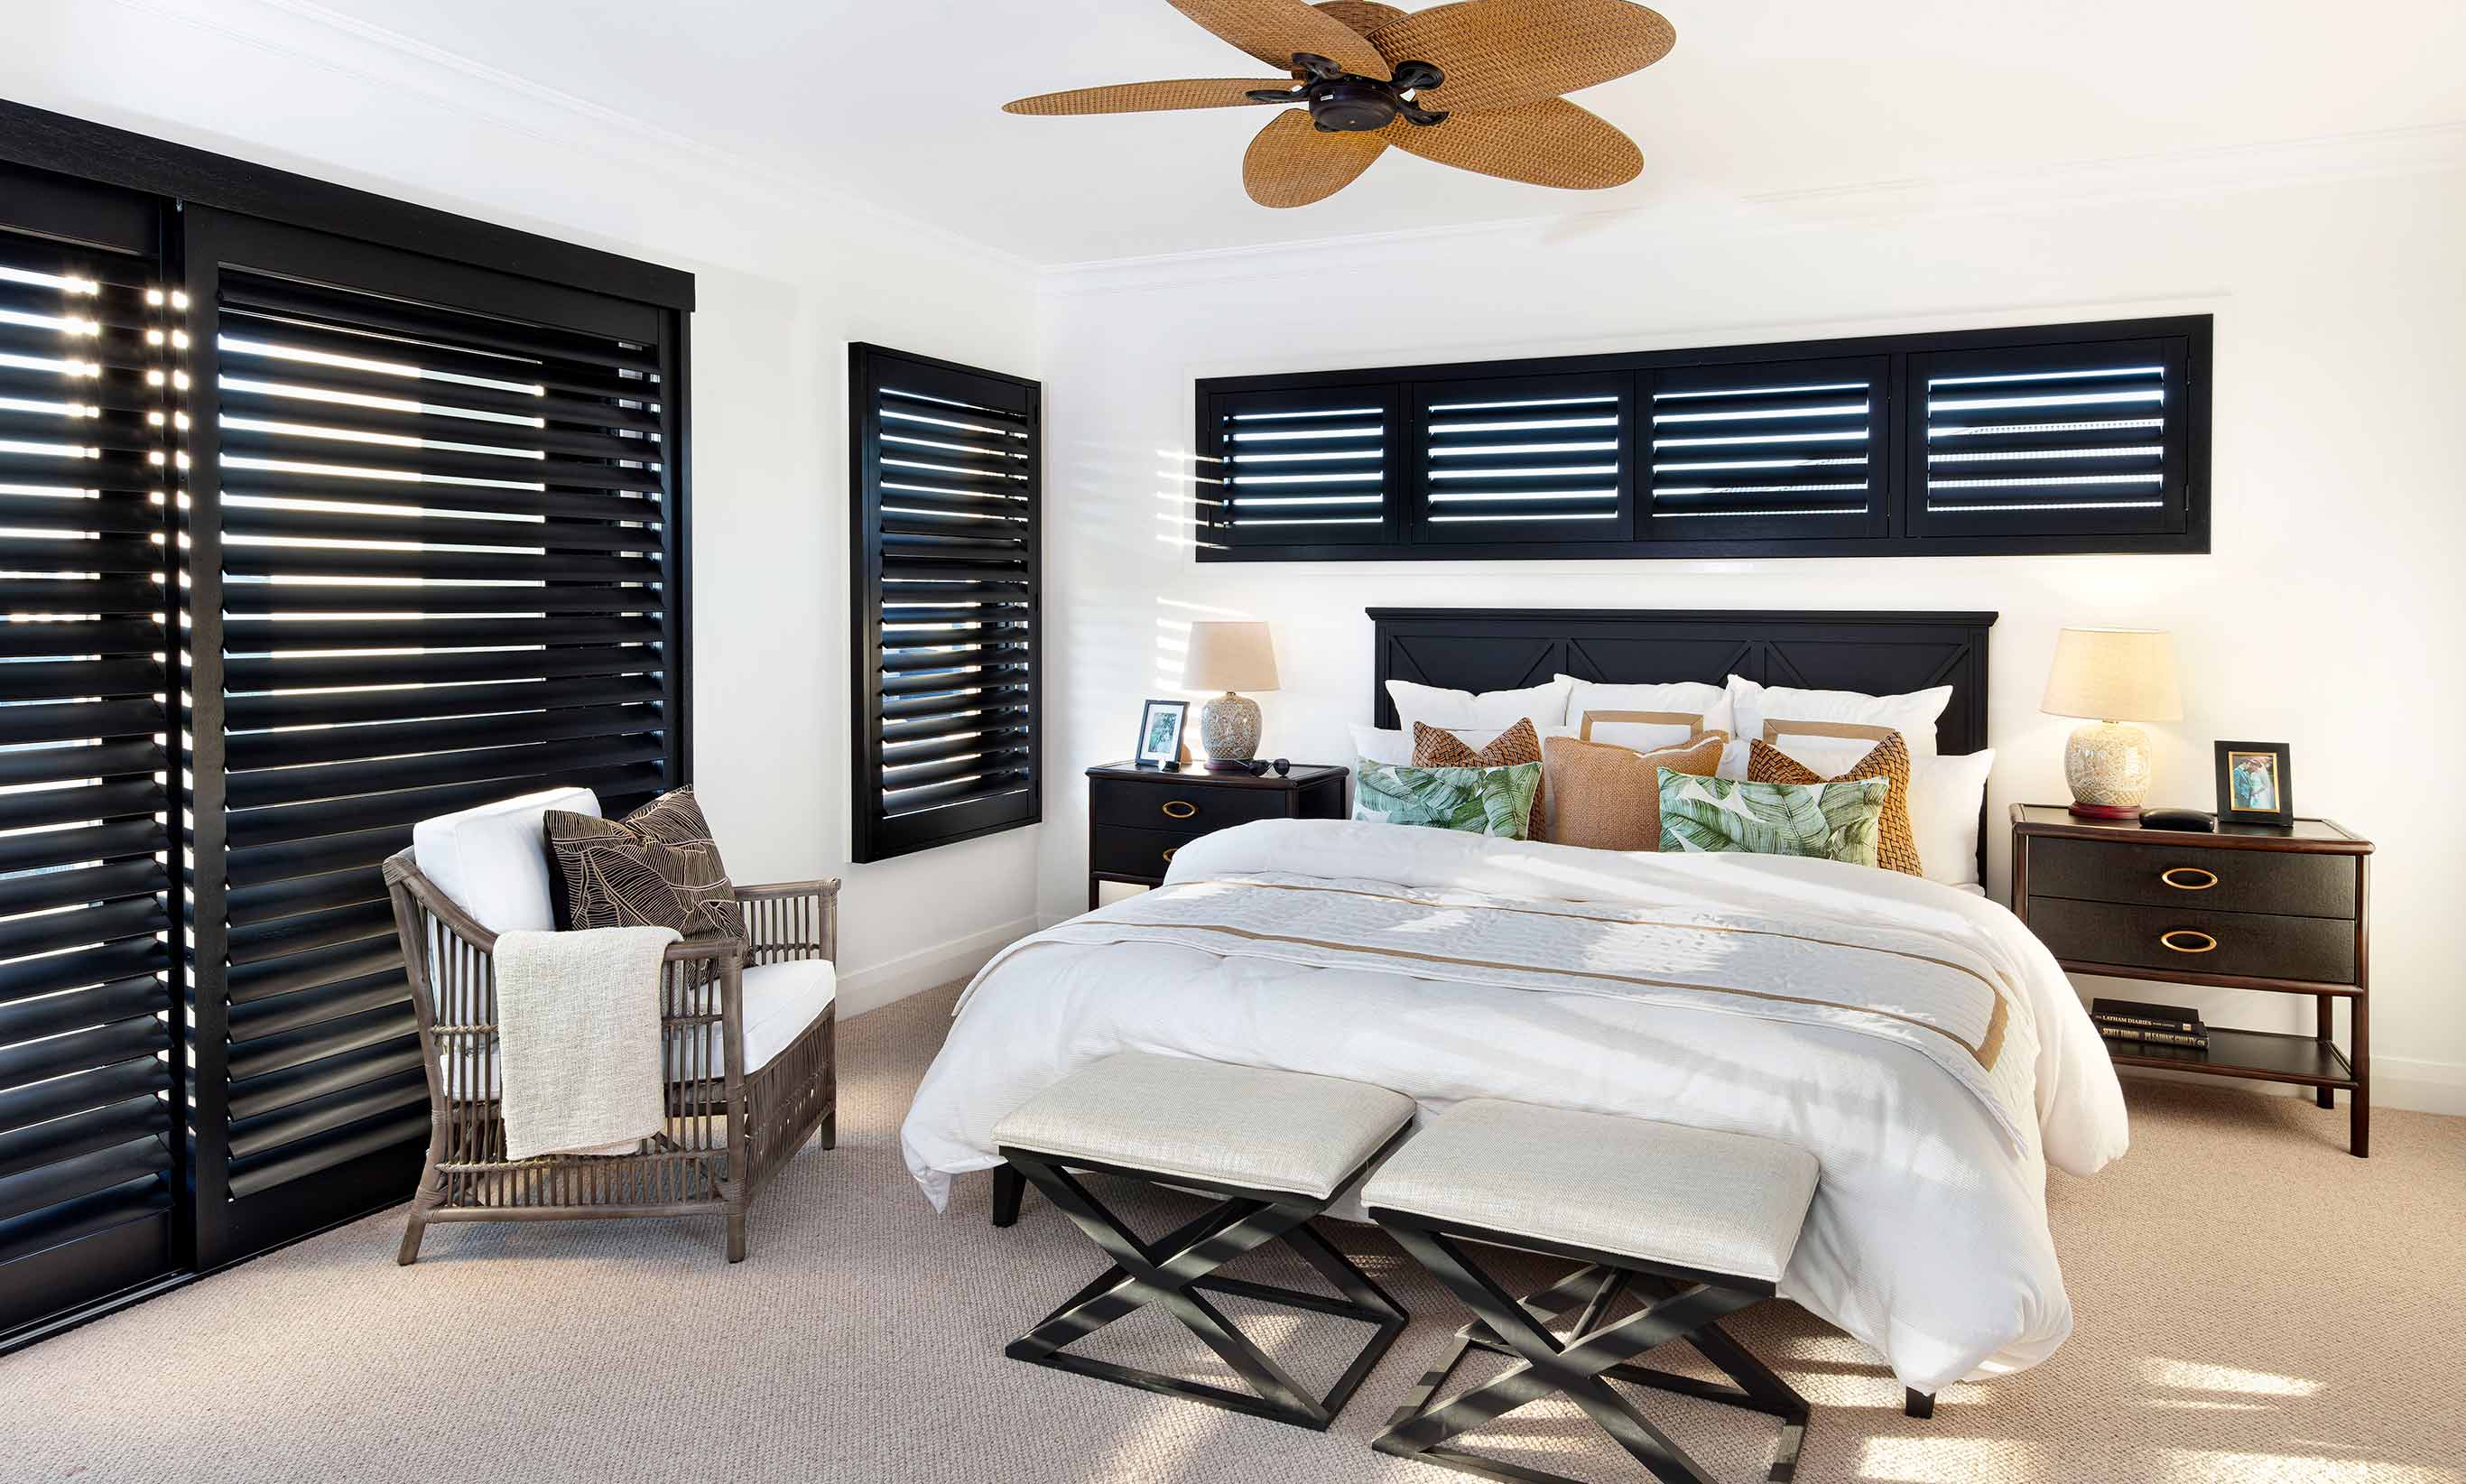 Classic Plantation styled homes are dramatic and use striking fixtures to enhance the livability of the home such as these beautiful dark mocha plantation shtters and teh feature ceiling fan.